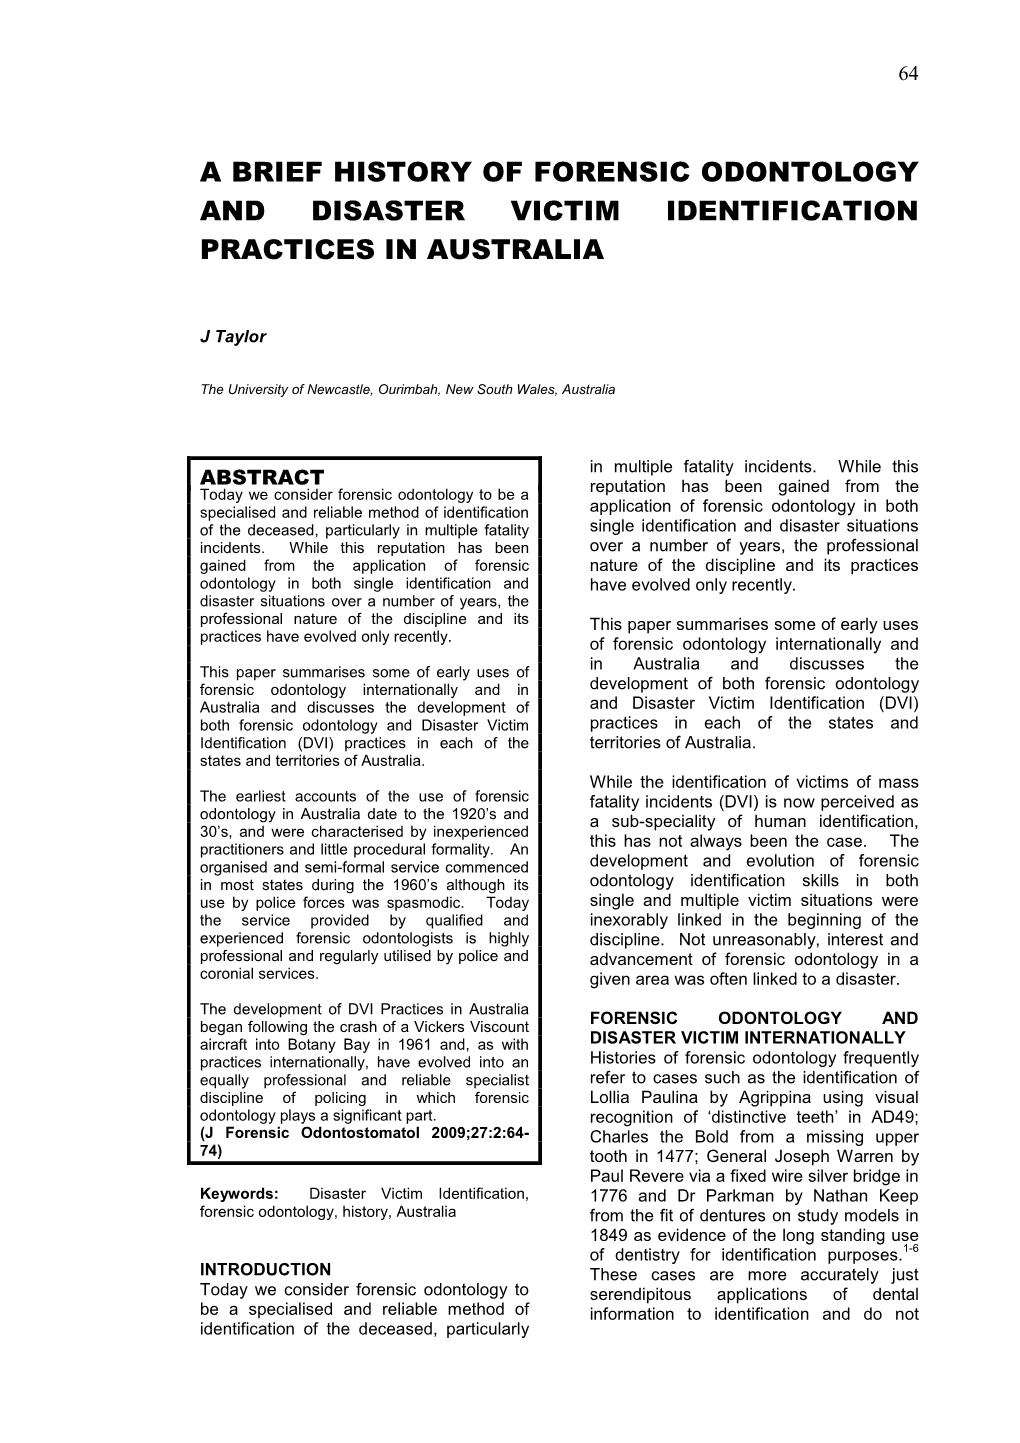 A Brief History of Forensic Odontology and Disaster Victim Identification Practices in Australia